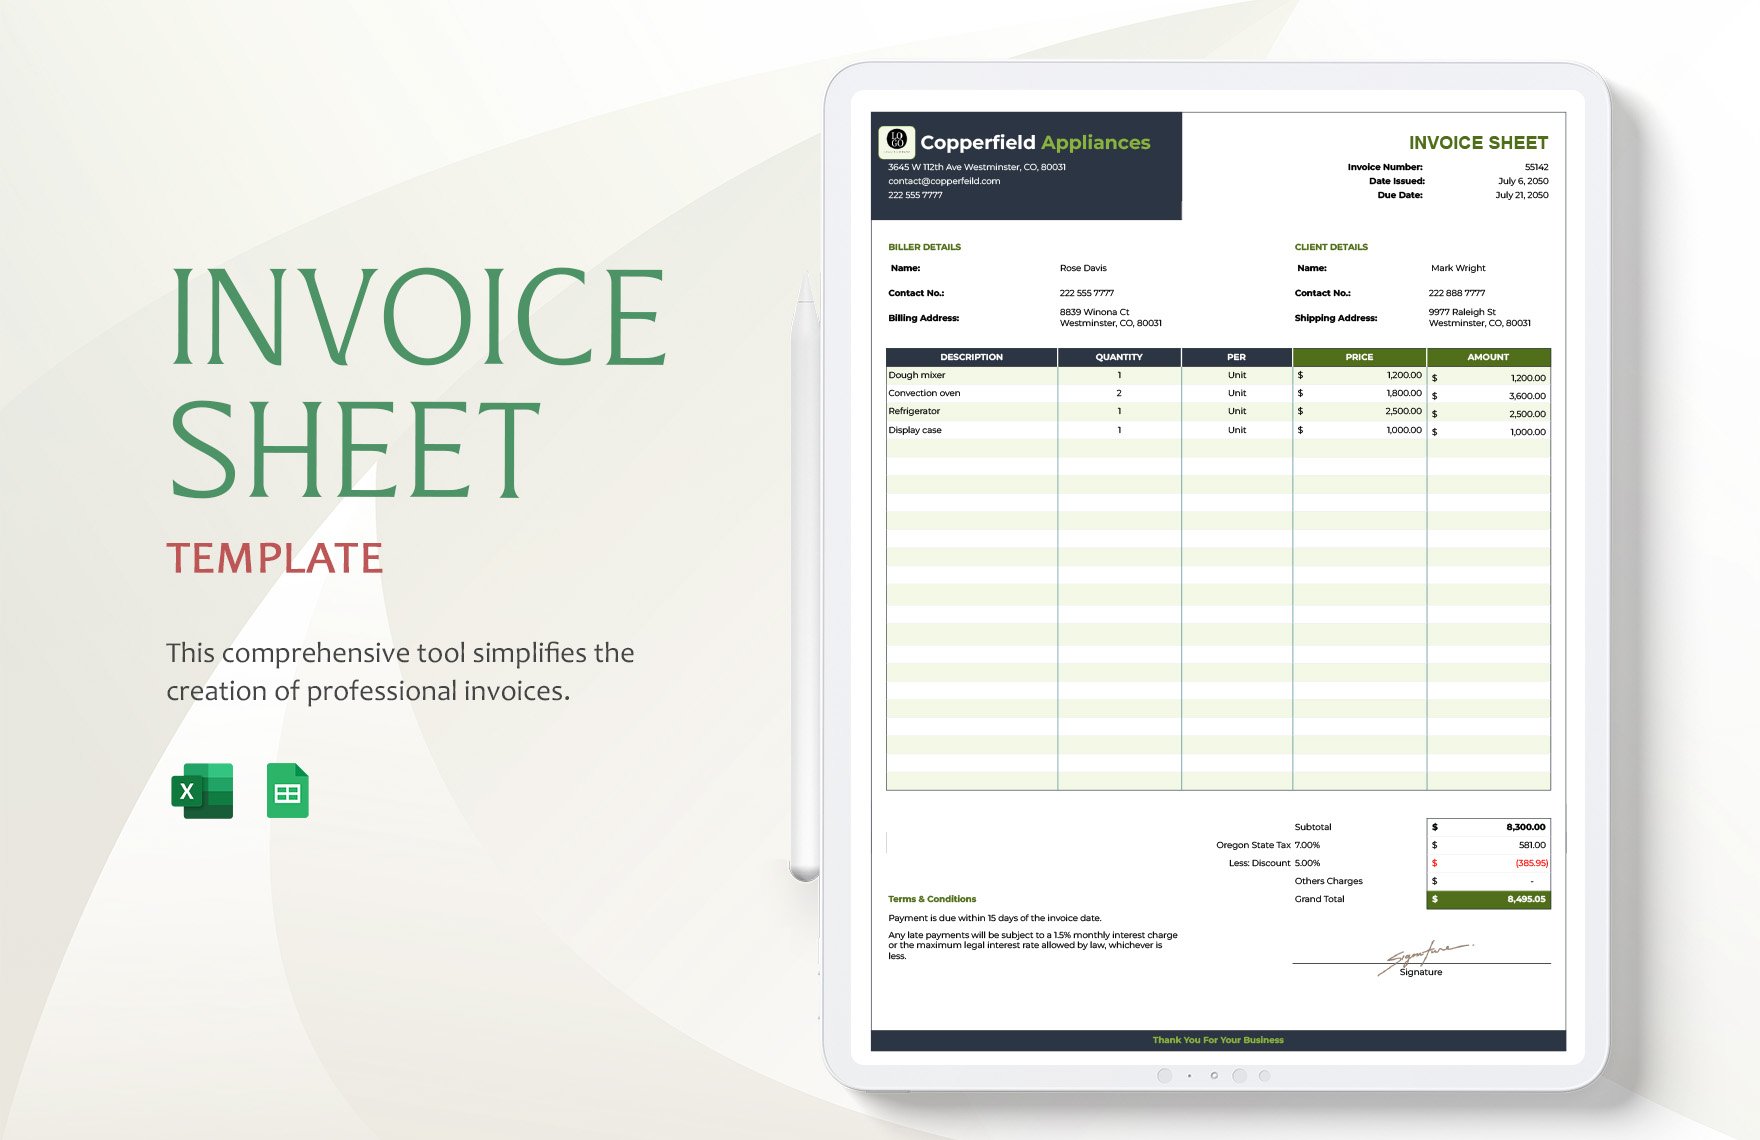 Invoice Sheet Template